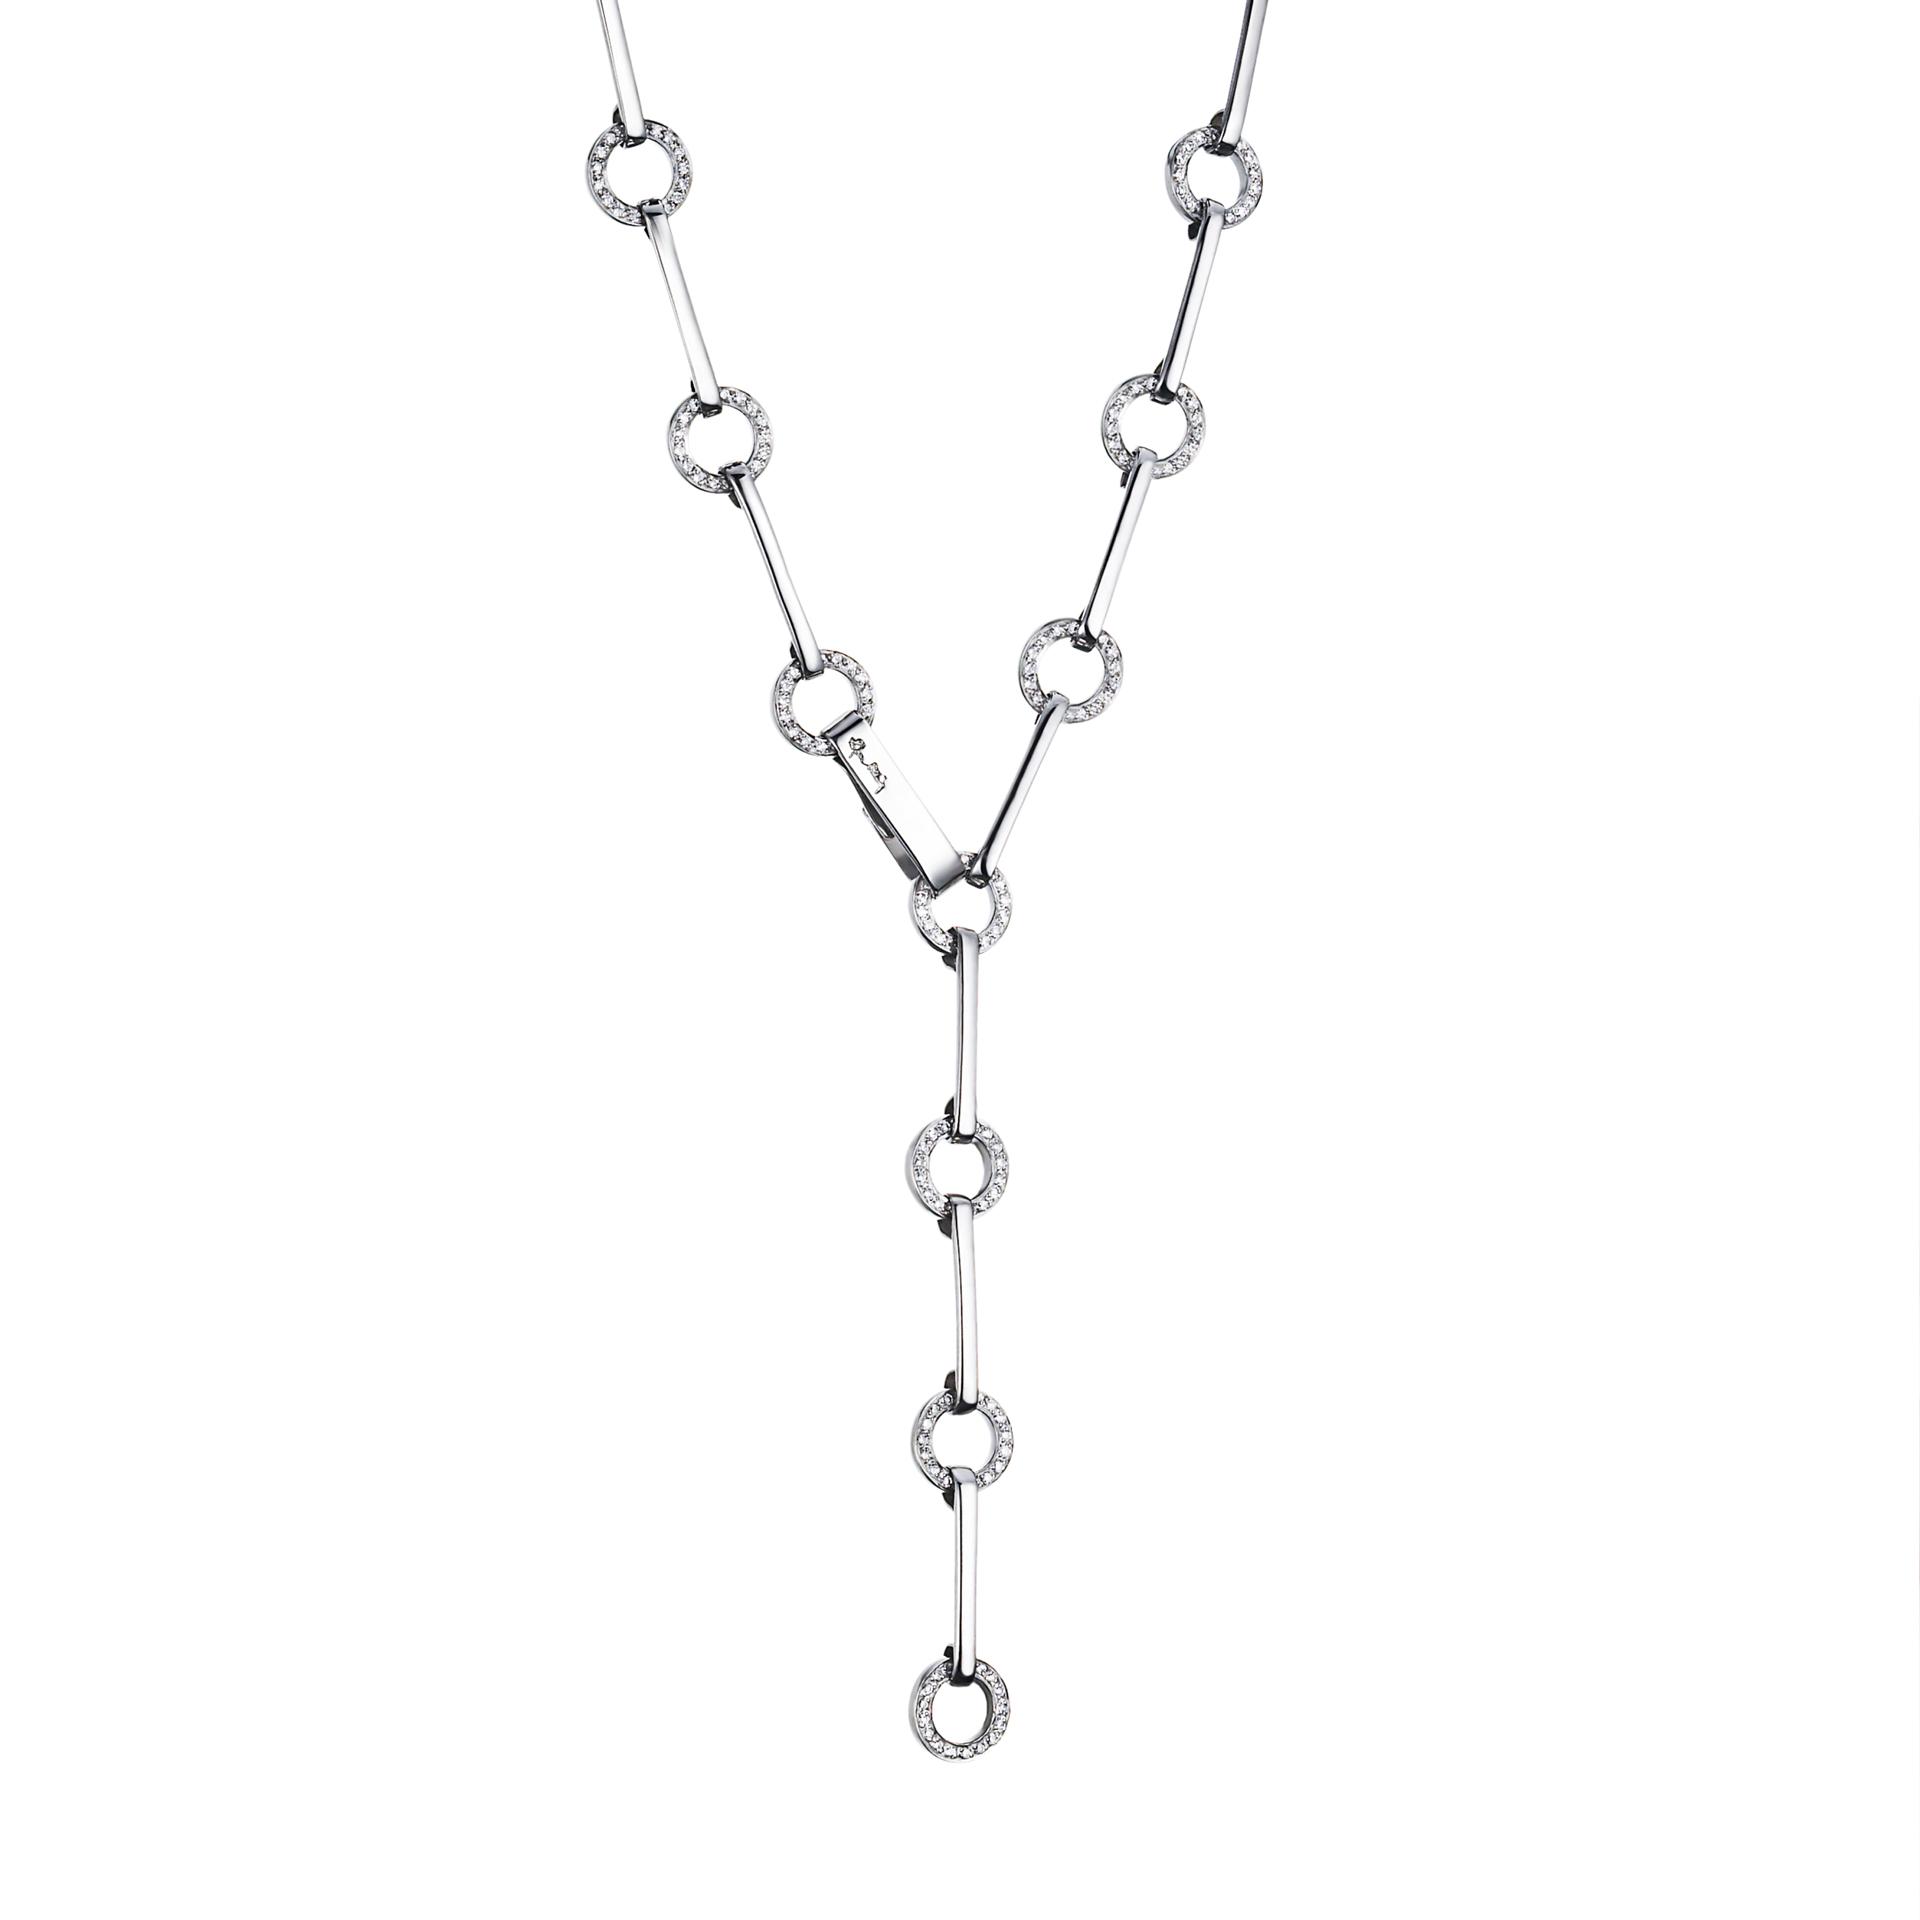 RING CHAIN & STARS NECKLACE